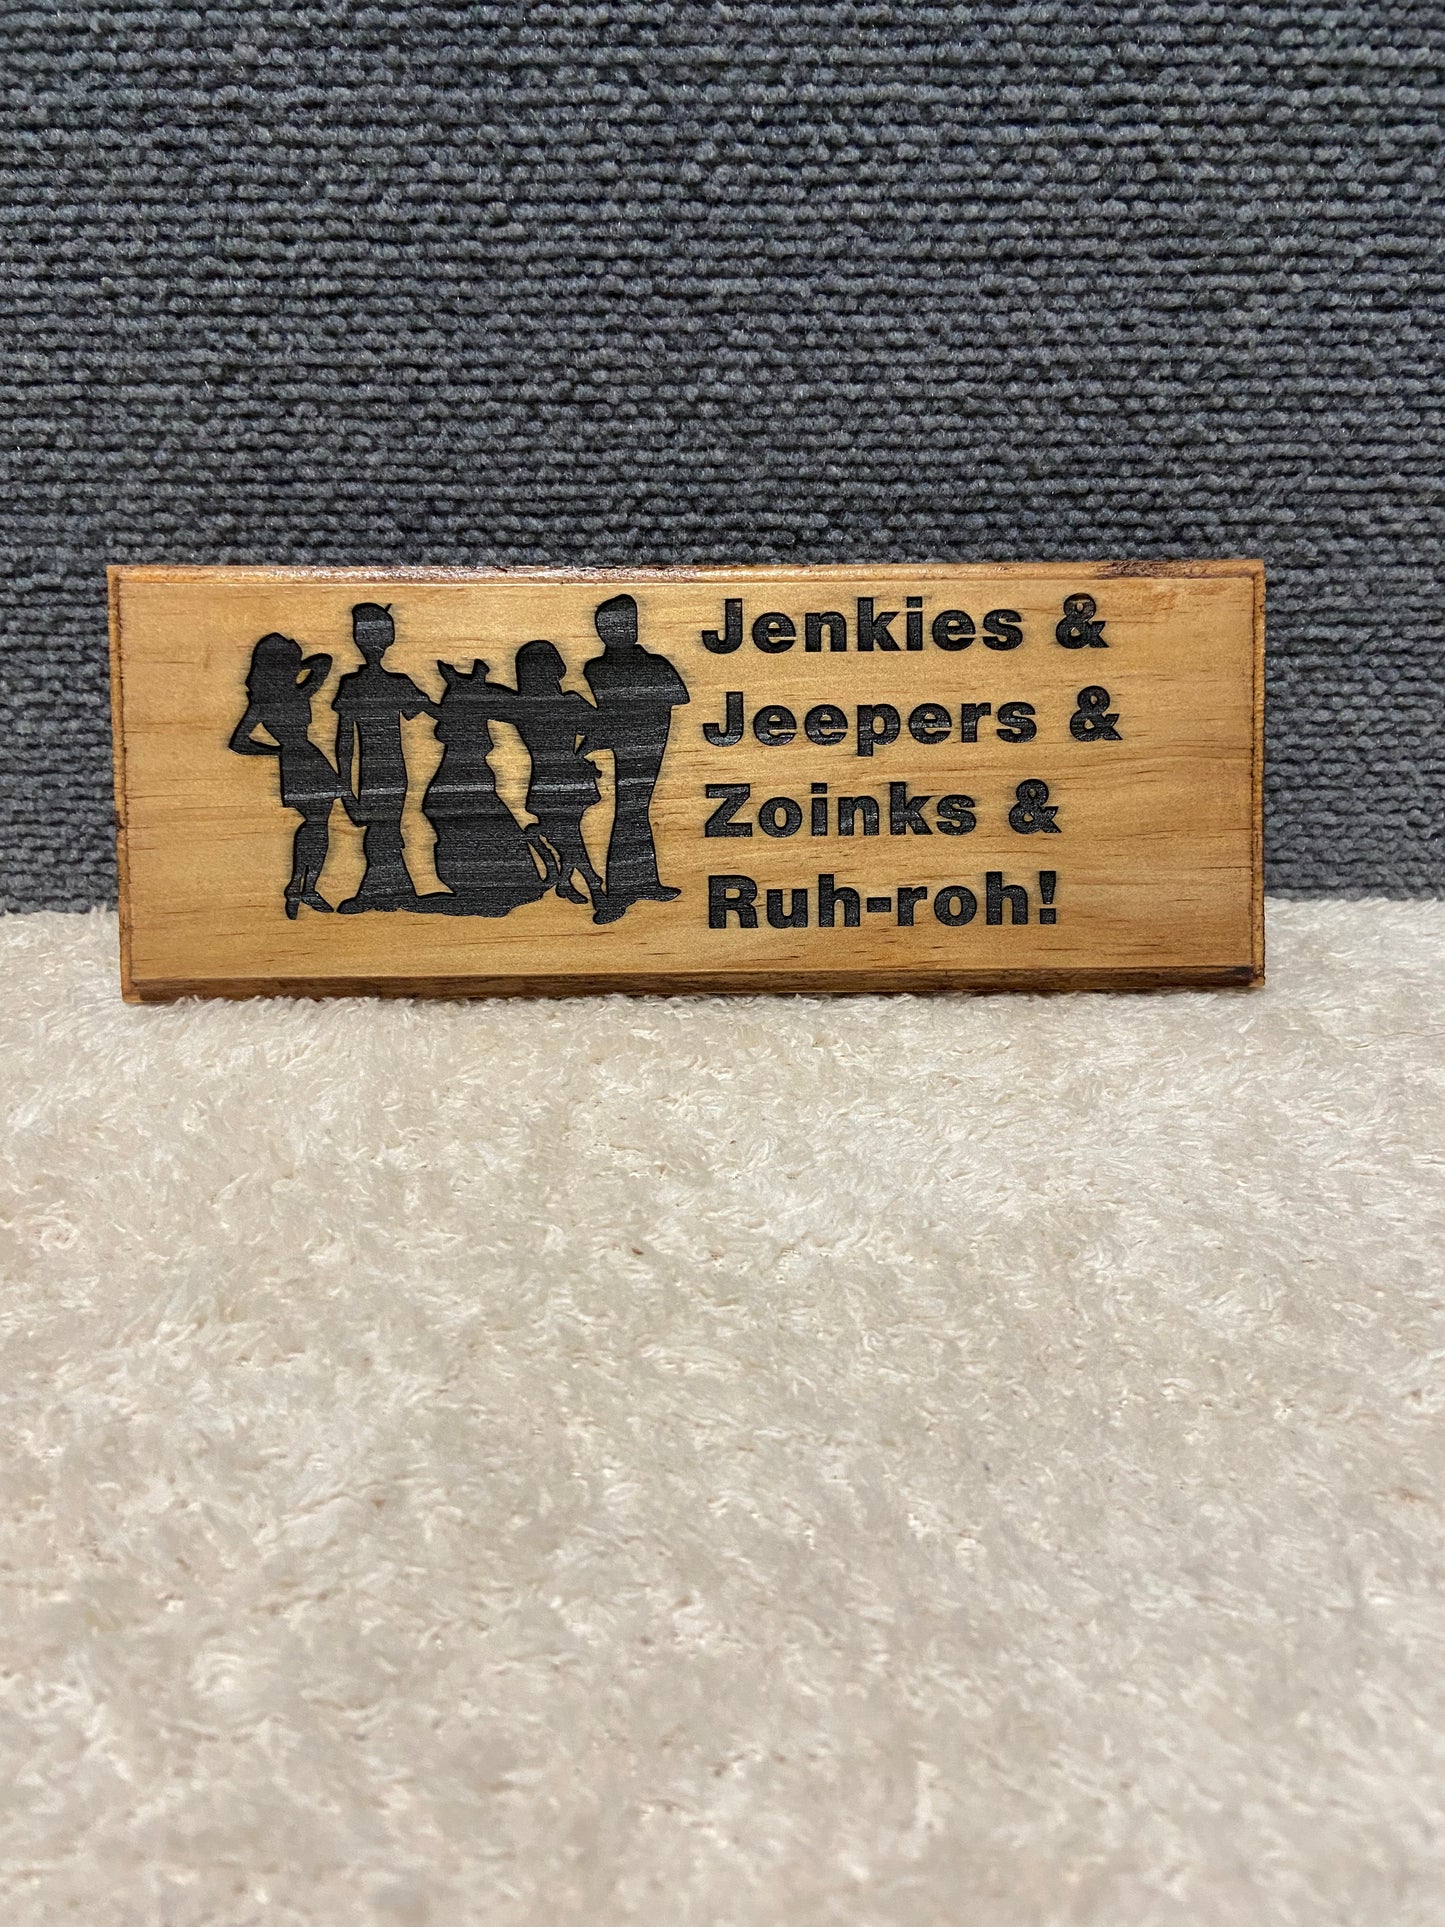 Jenkies & Jeepers & Zoinks & Ruh-roh